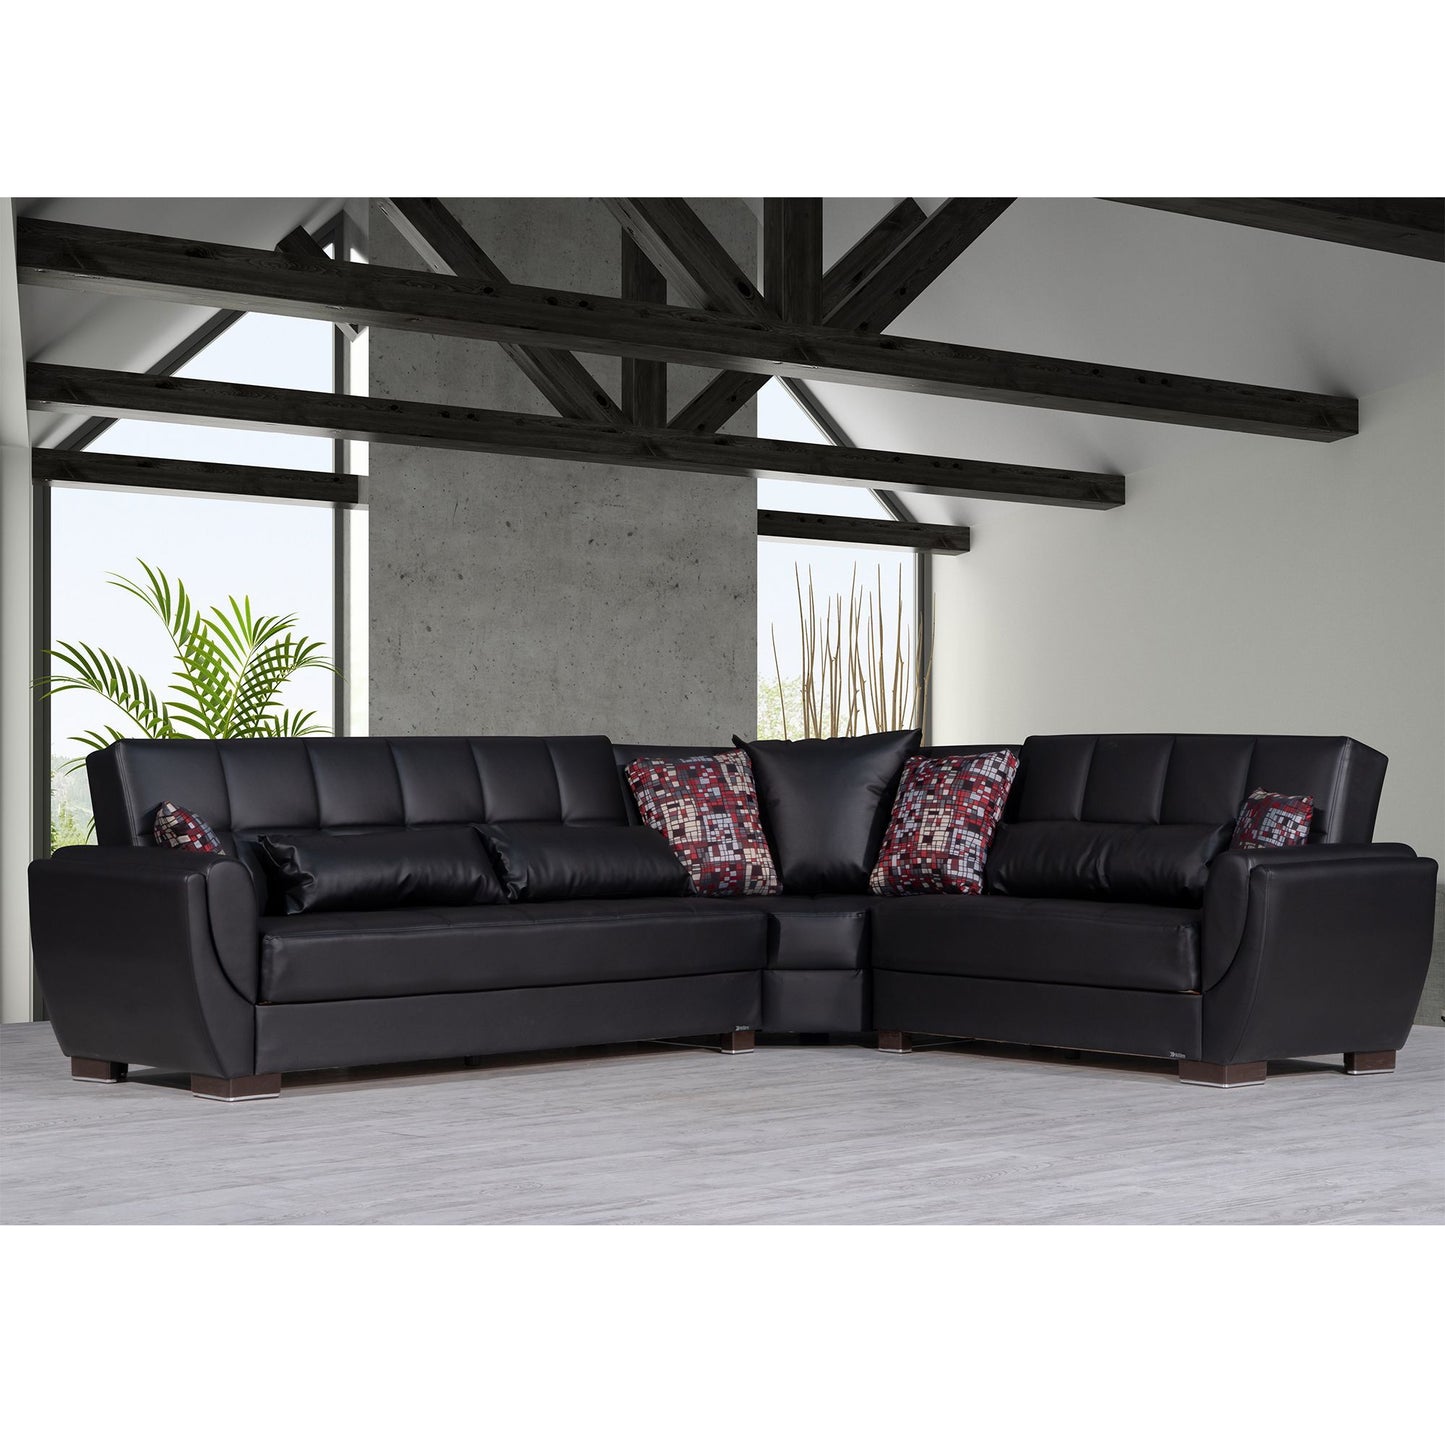 Ottomanson Armada Air - Convertible Sectional With Storage